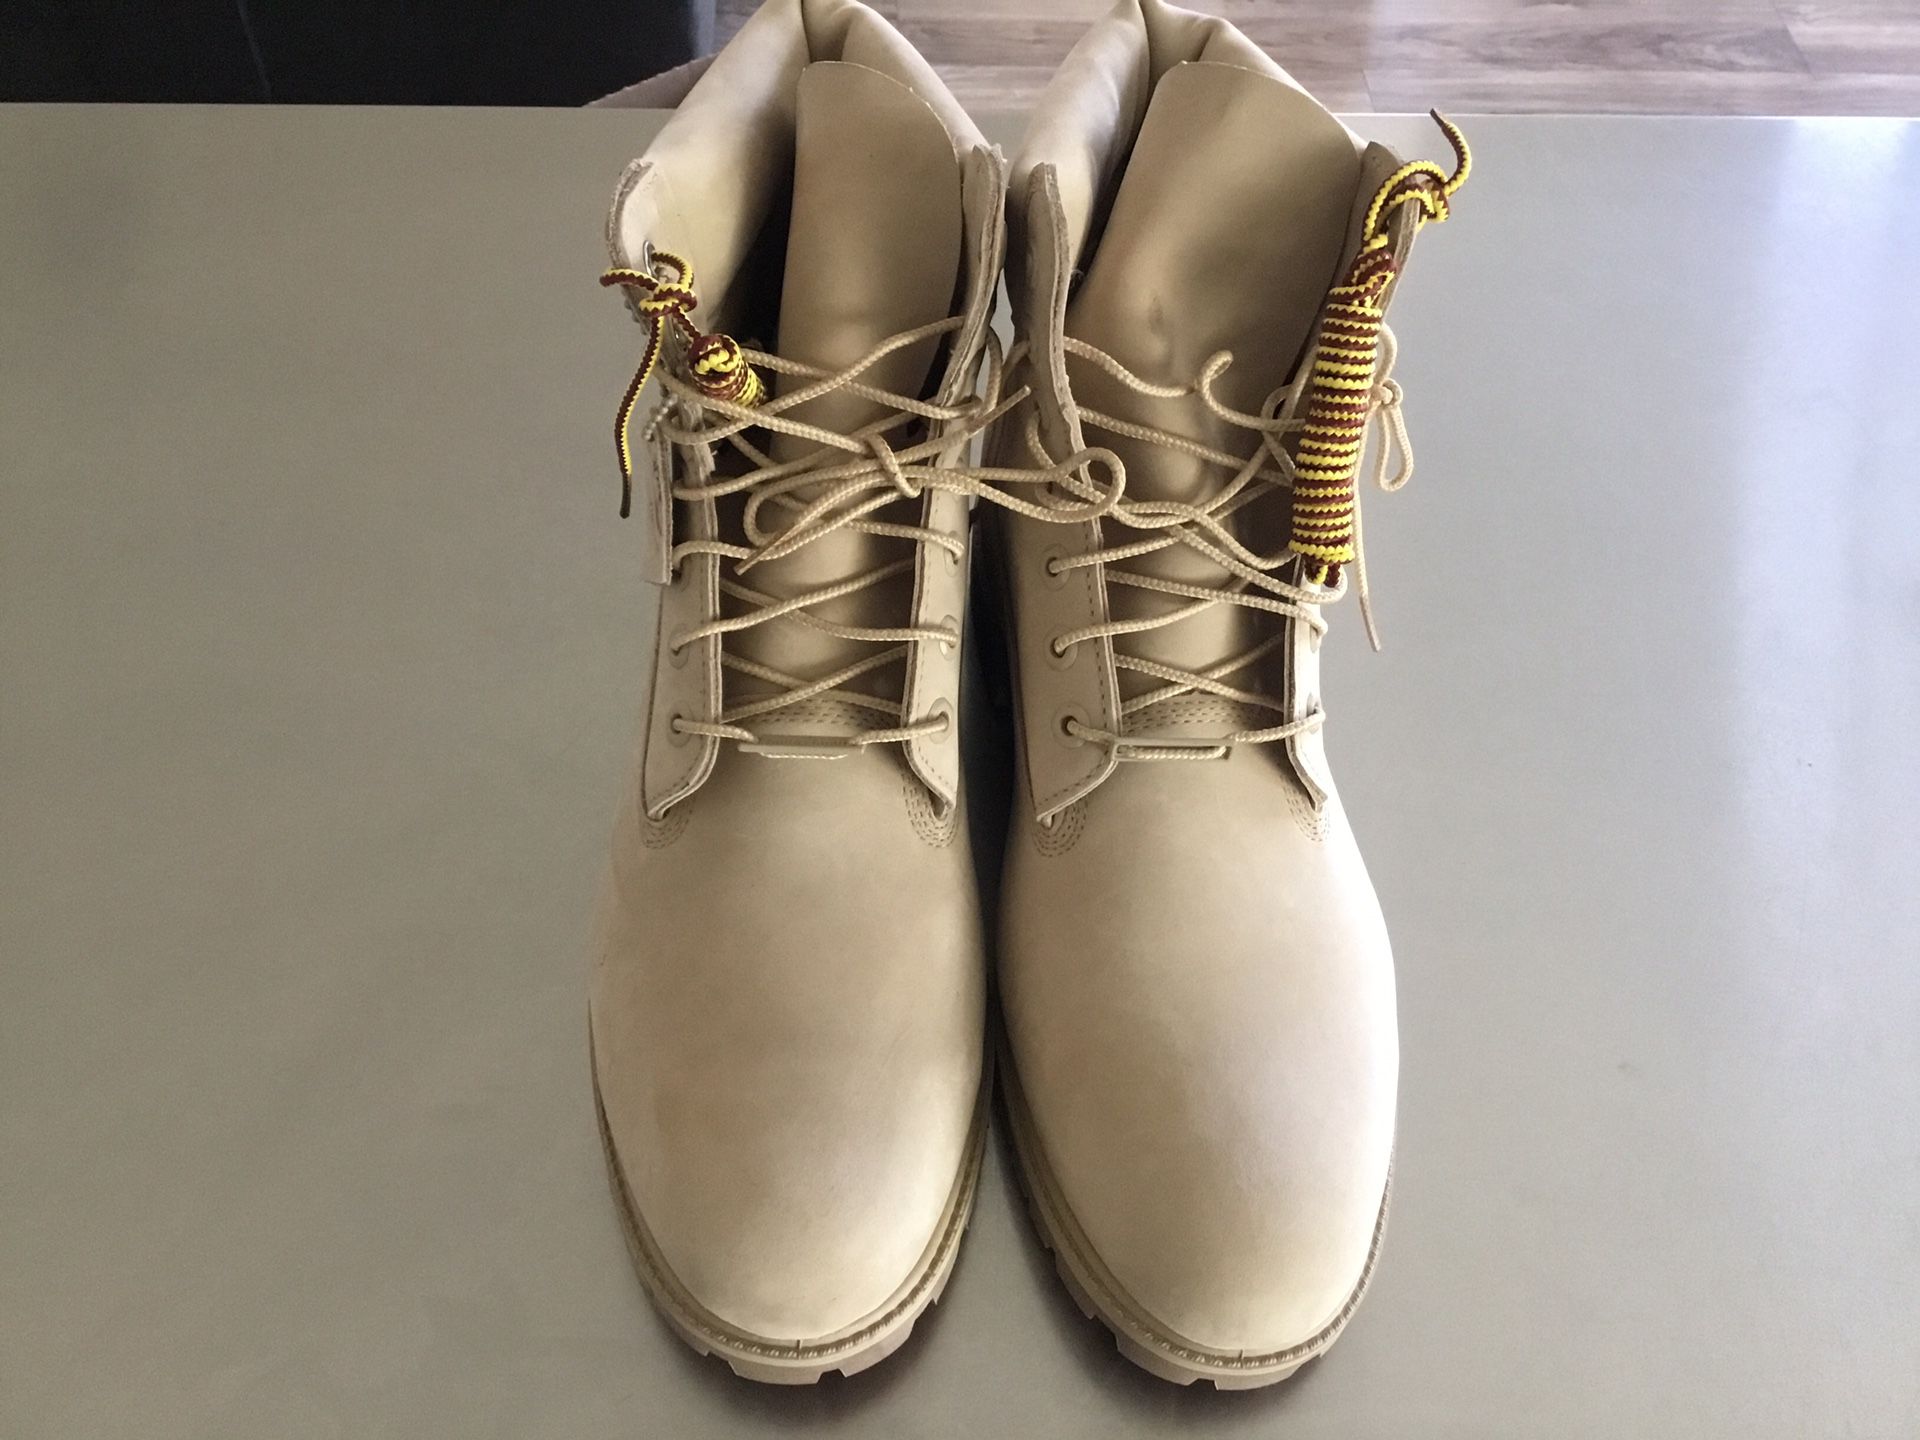 New Men’s Timberland Boots size 12